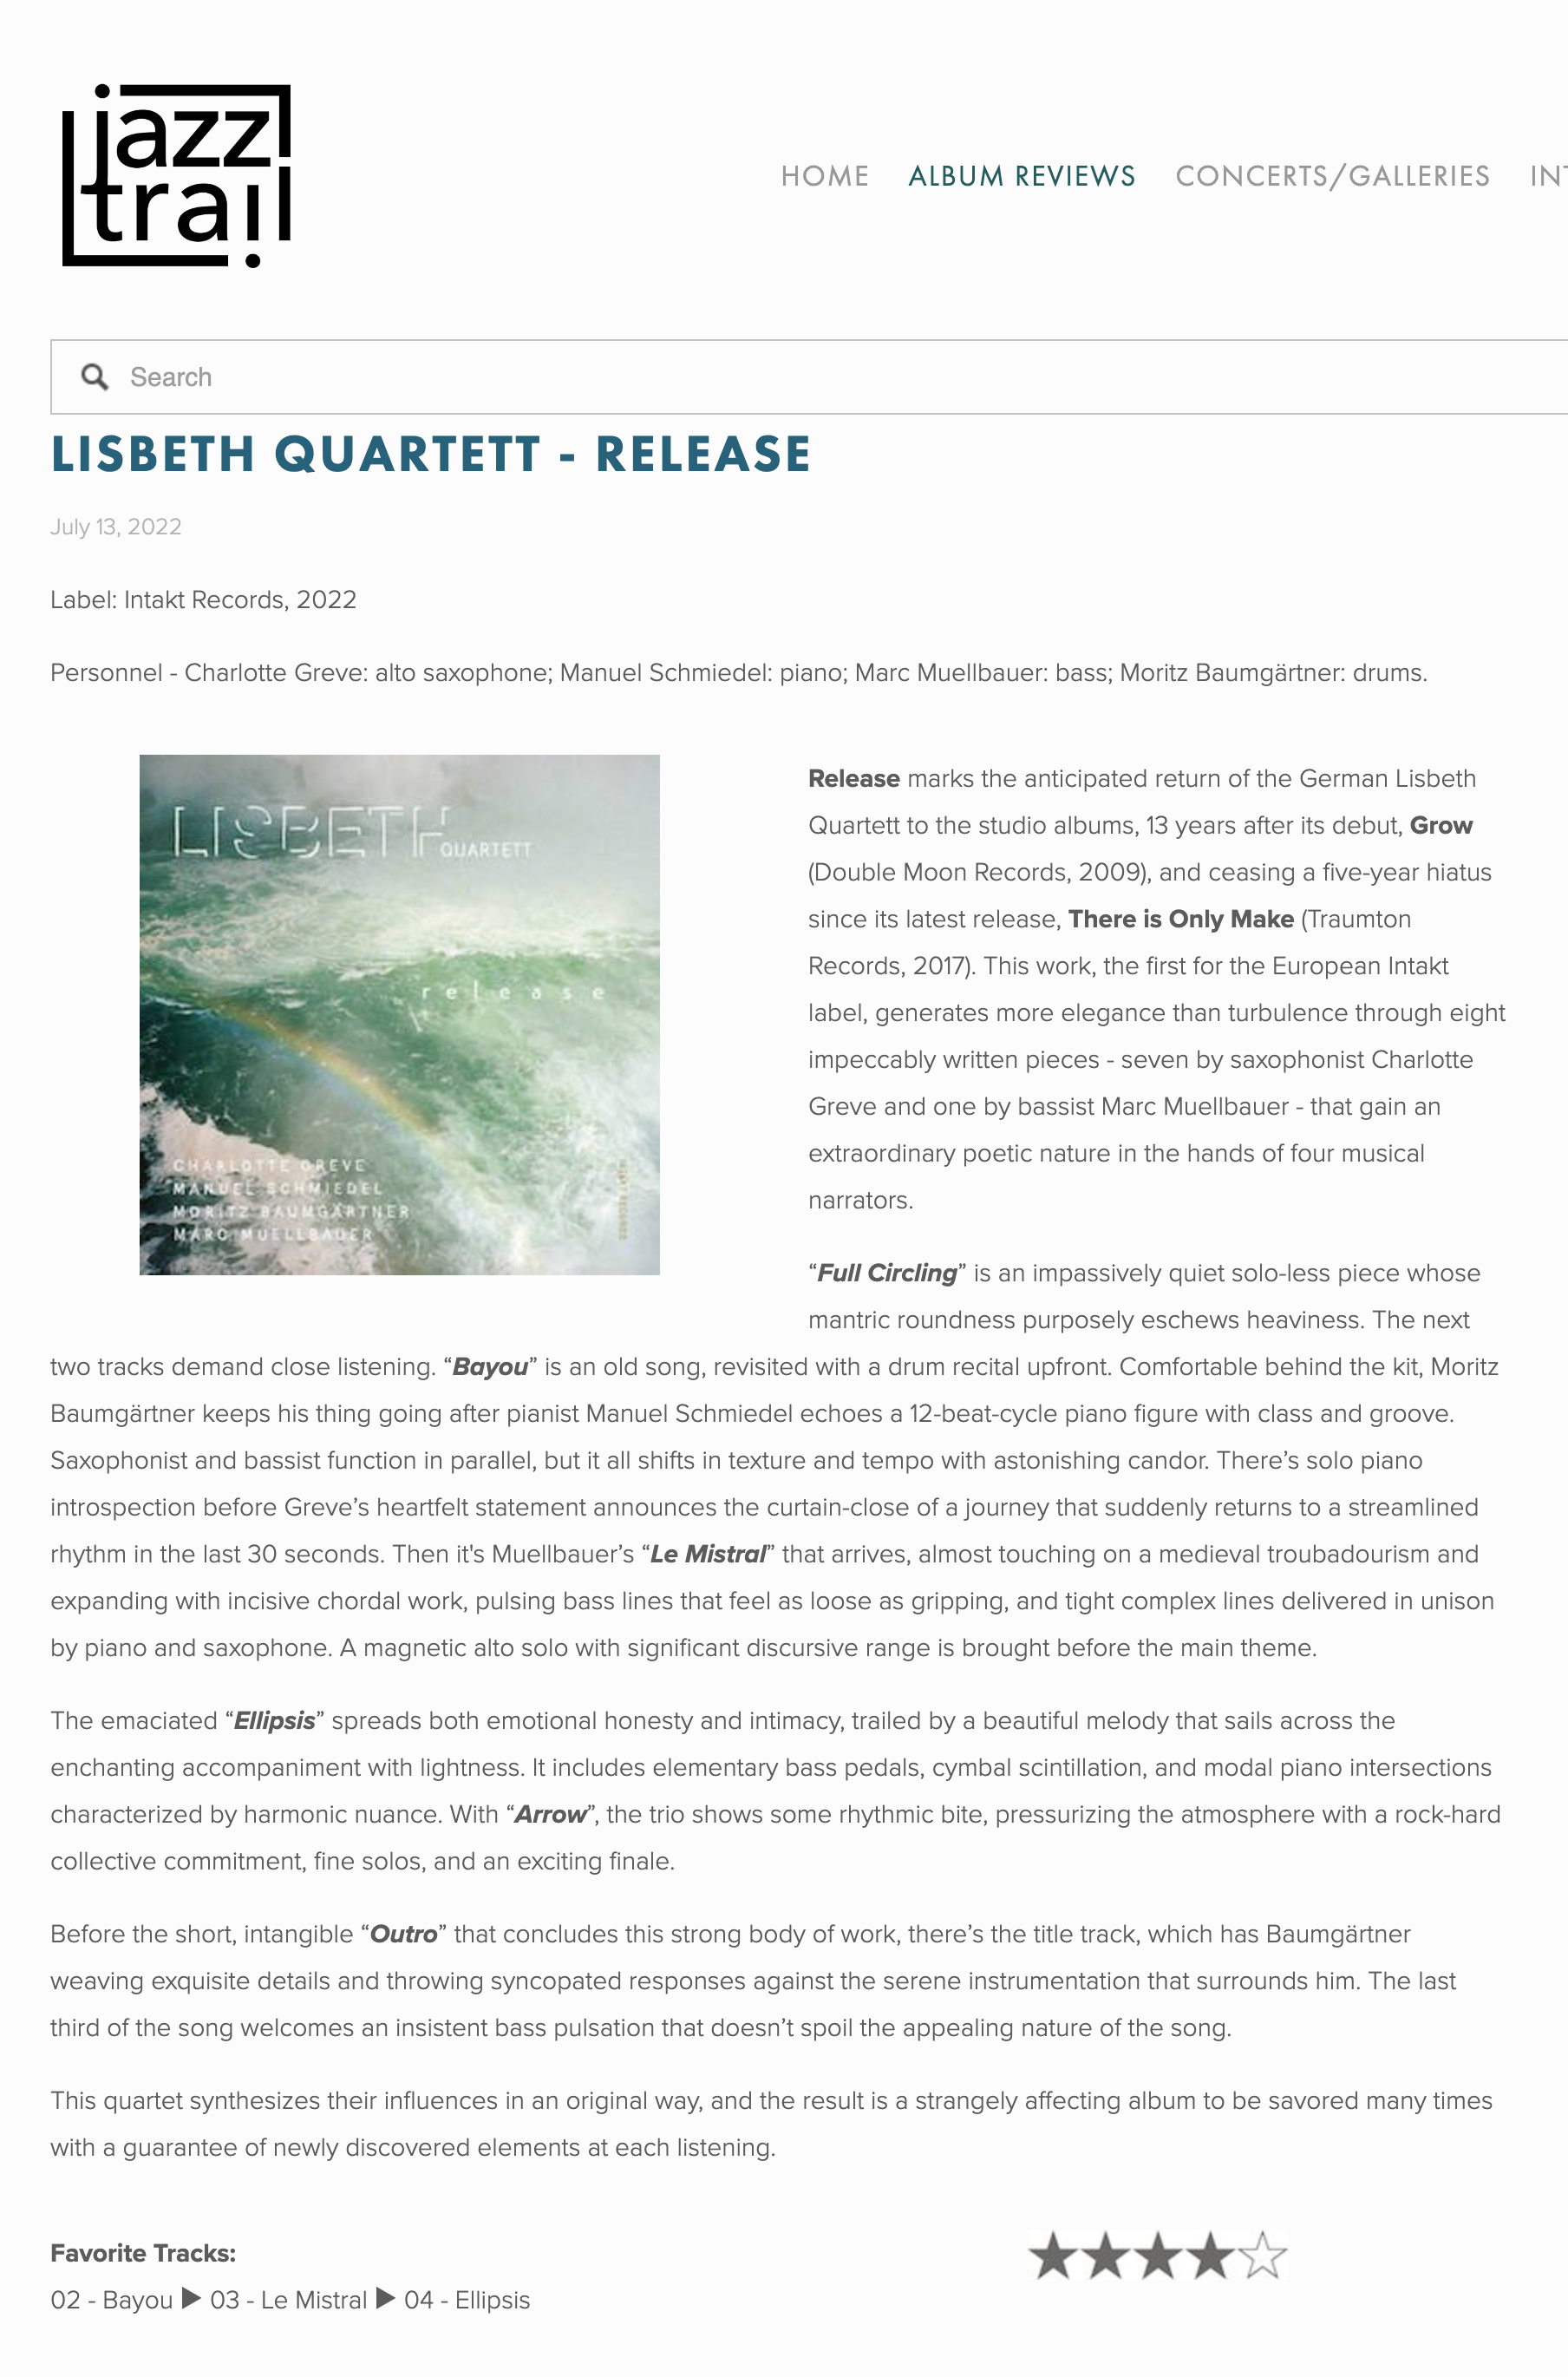 Emotional reactions to the pandemic have had a big impact on artistic output in the last two years – but new music for 2022 is different. These albums were conceived and recorded in a time of relief and cautious optimism, as lockdowns lifted. And that delicate, hopeful spirit is at the heart of Release by Lisbeth Quartett.